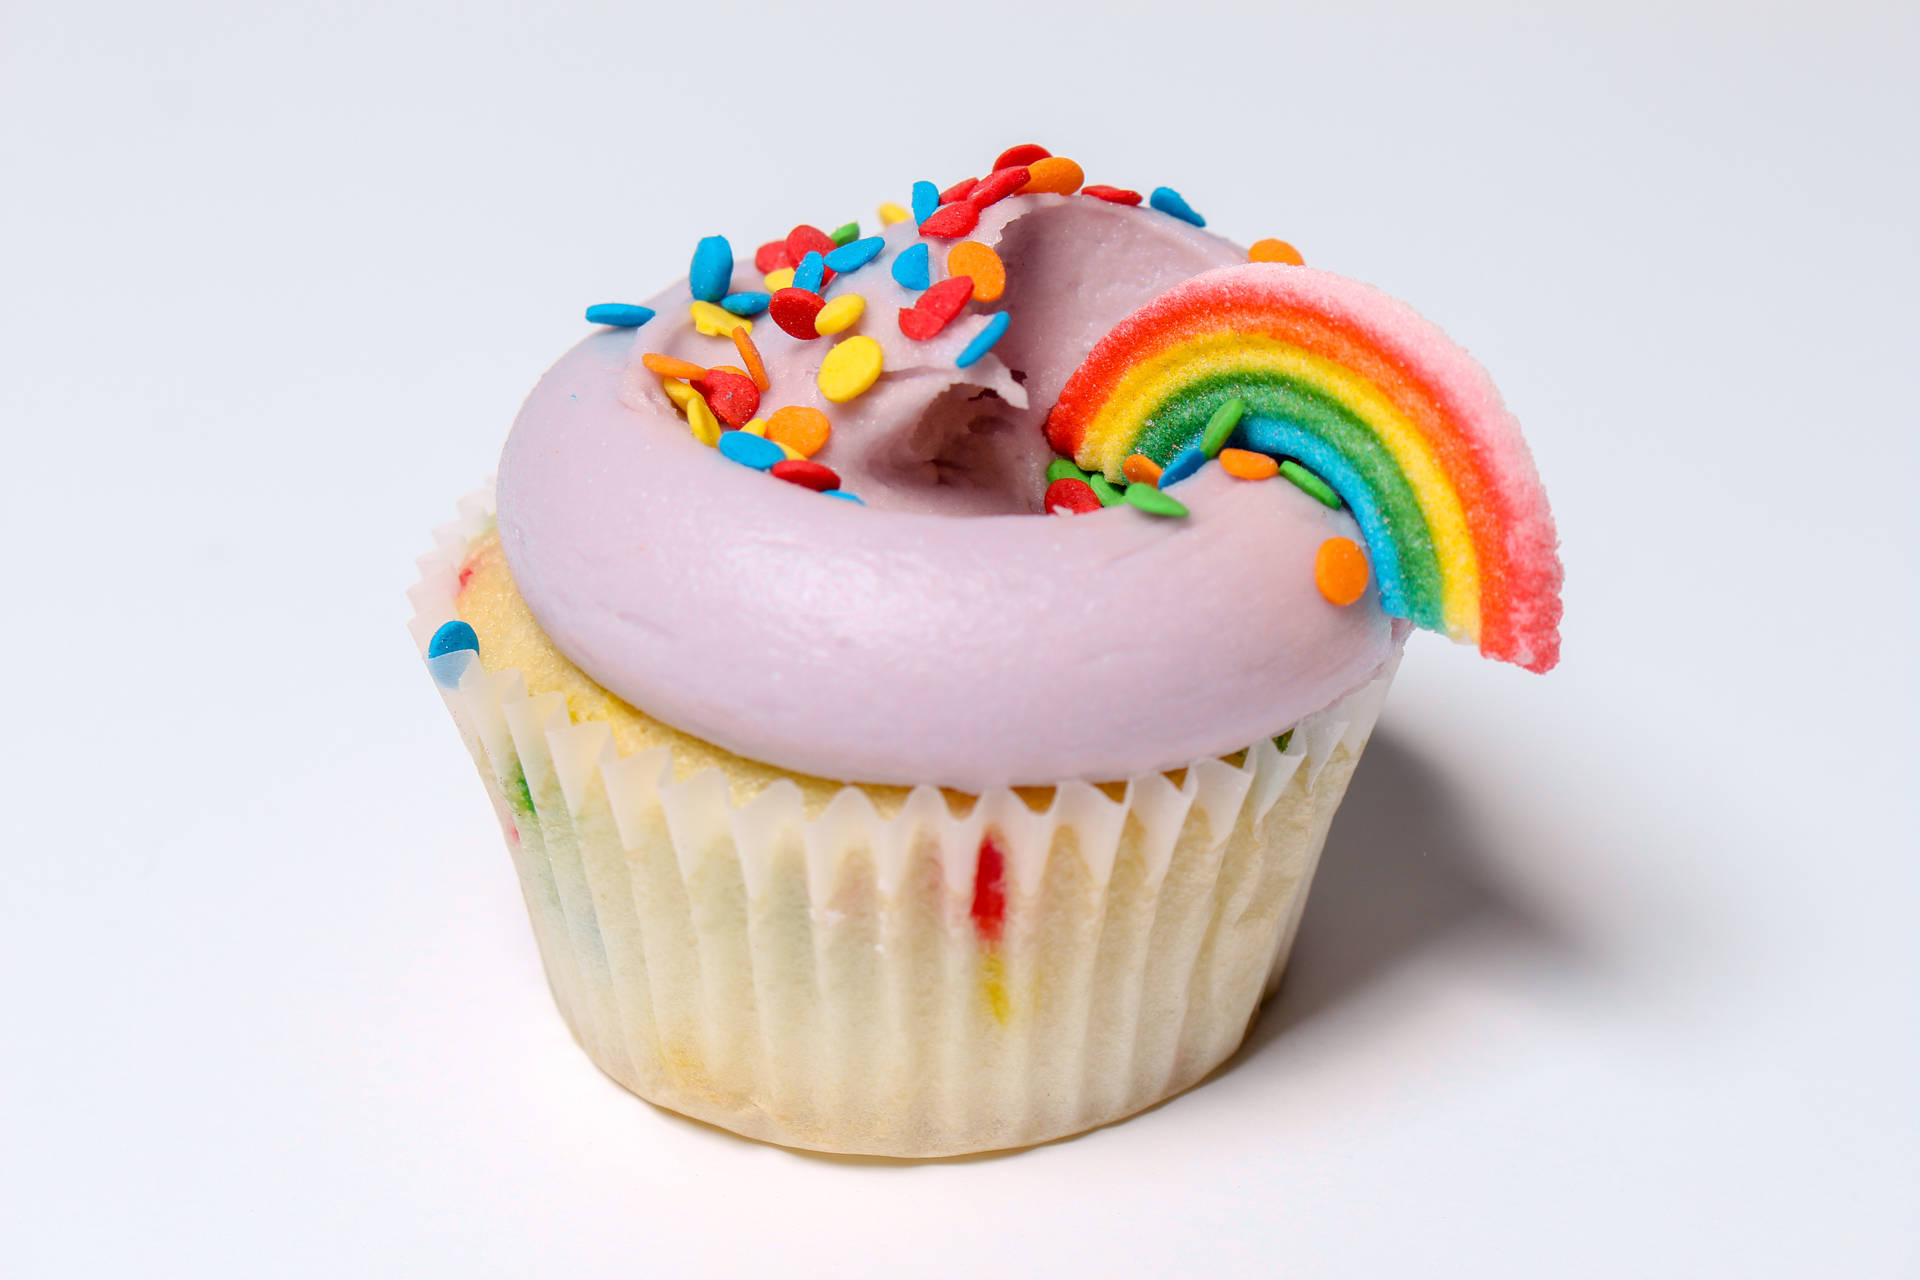 Cupcake 5184X3456 Wallpaper and Background Image